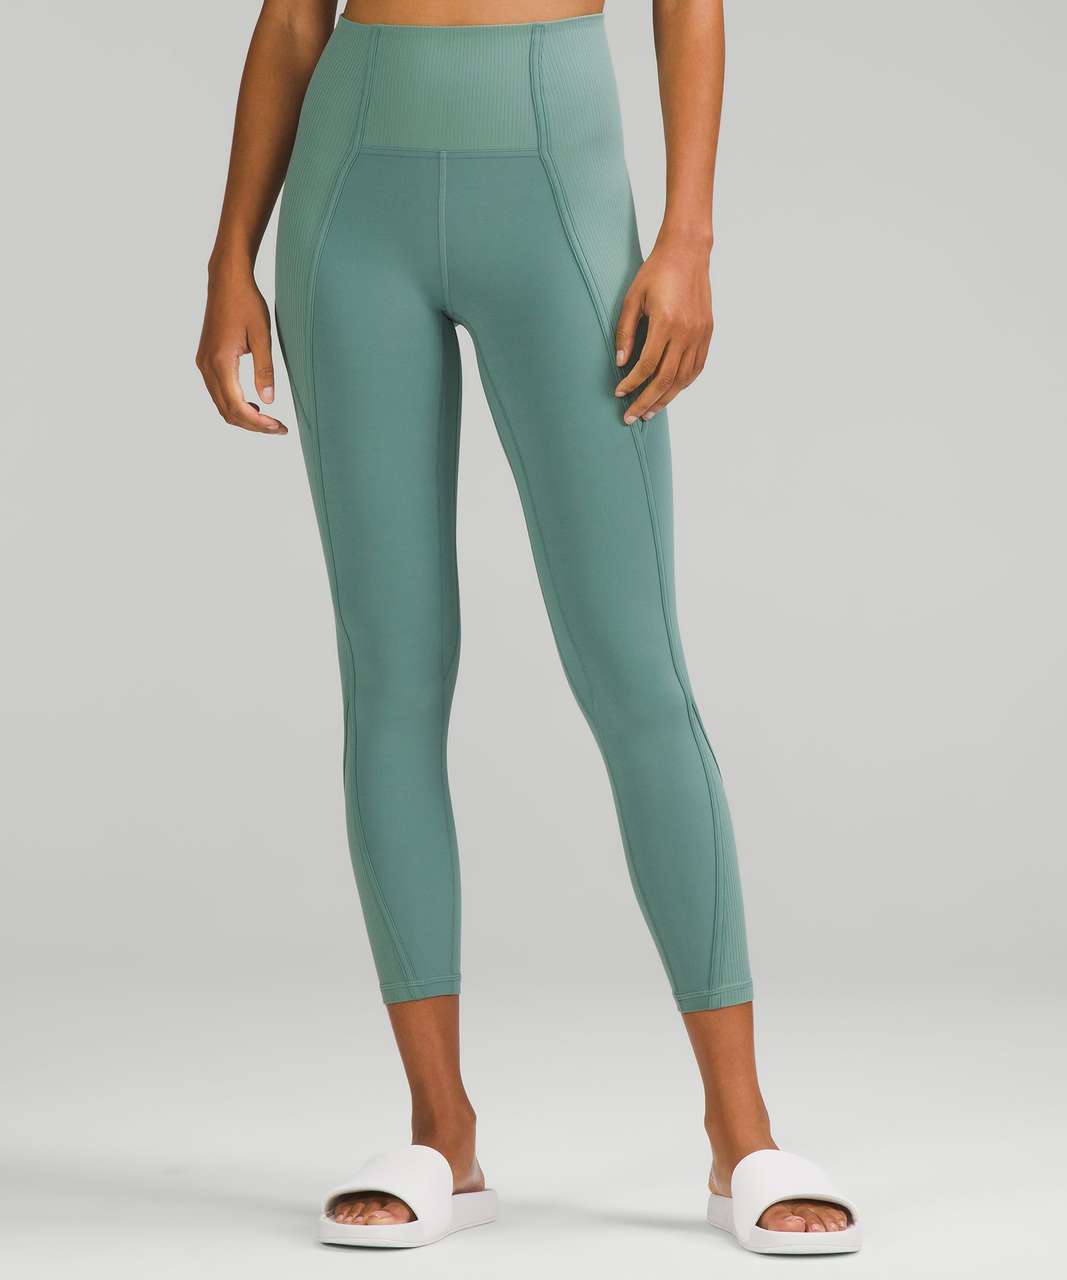 NWT Lululemon Align Pant with Pockets Size 4 Tidewater Teal 25 Nulu RARE!